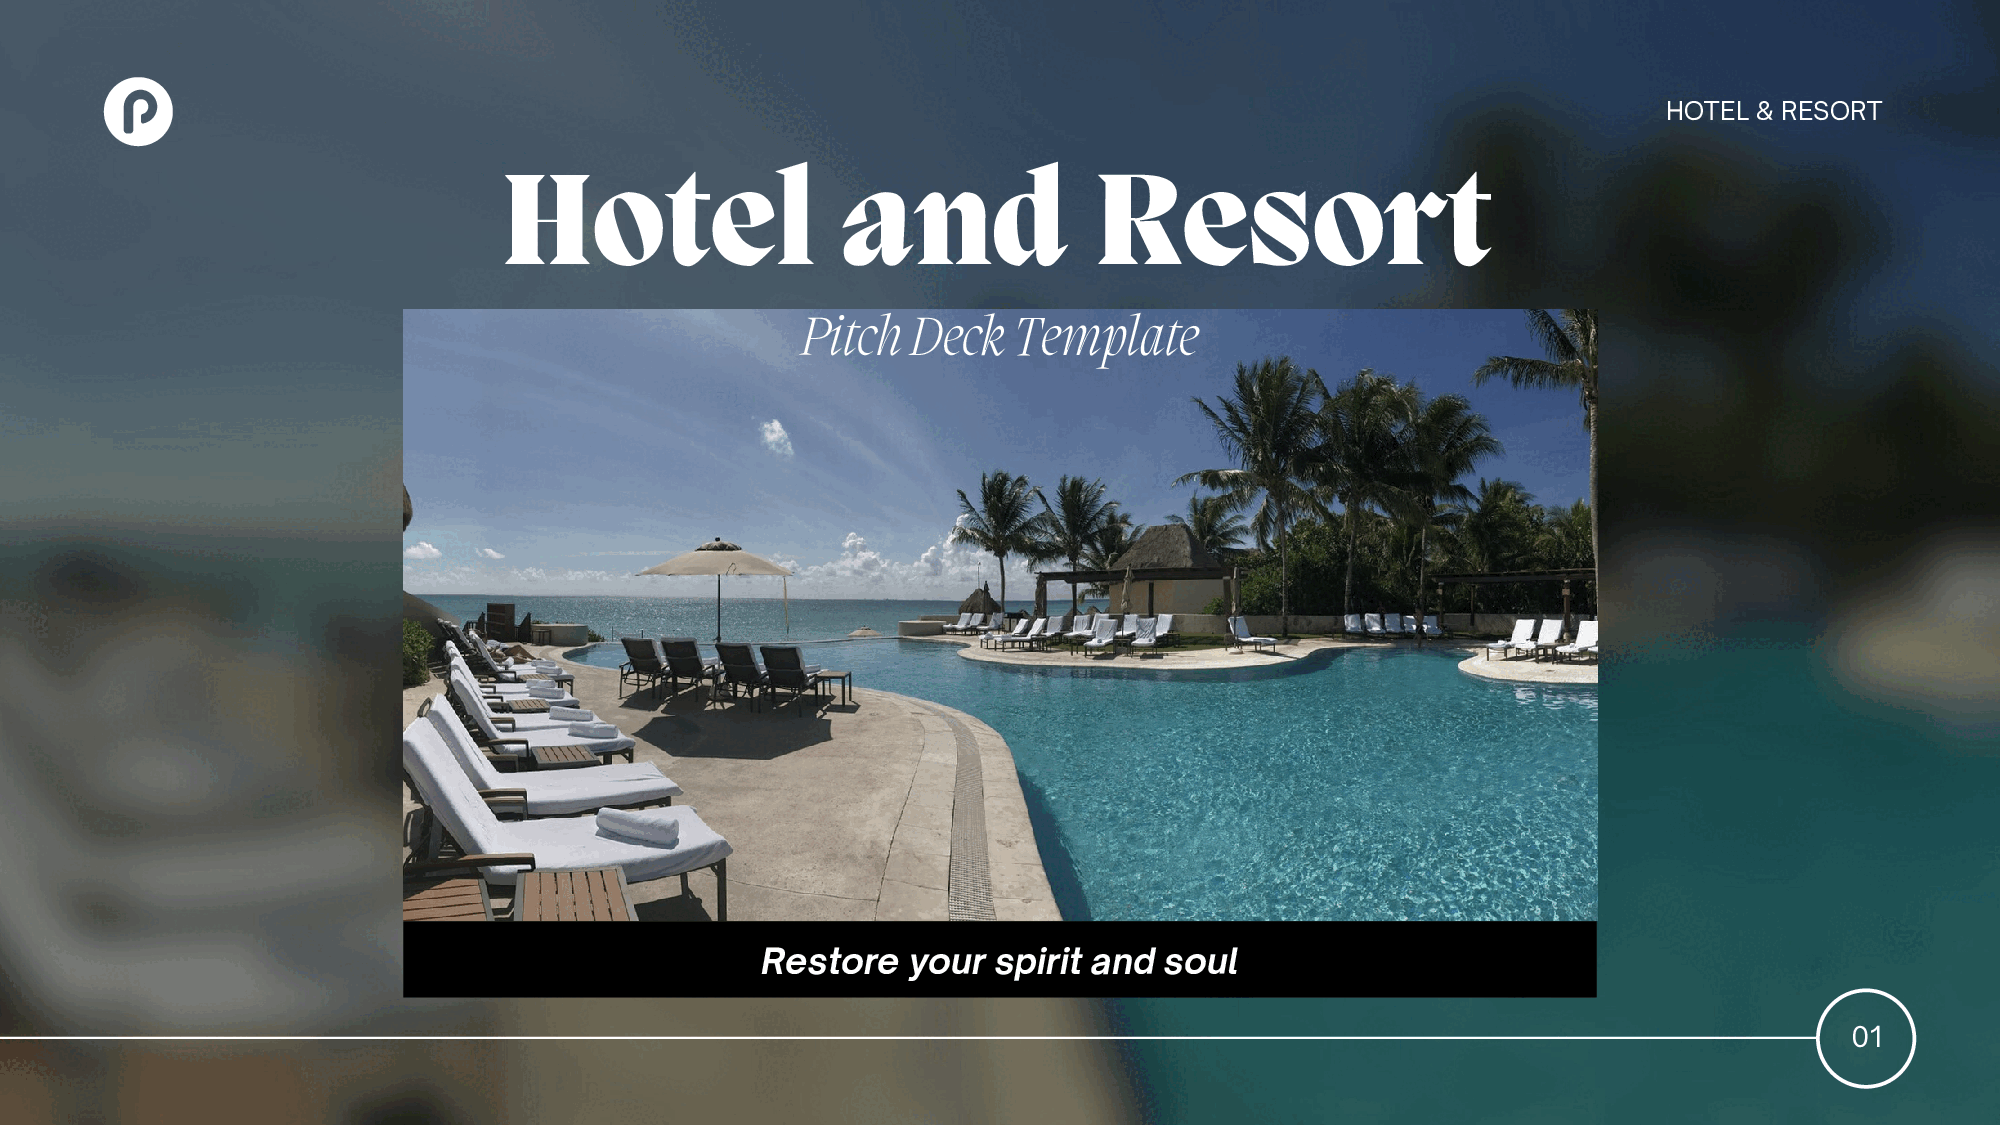 Hotel and Resort Pitch Deck Template